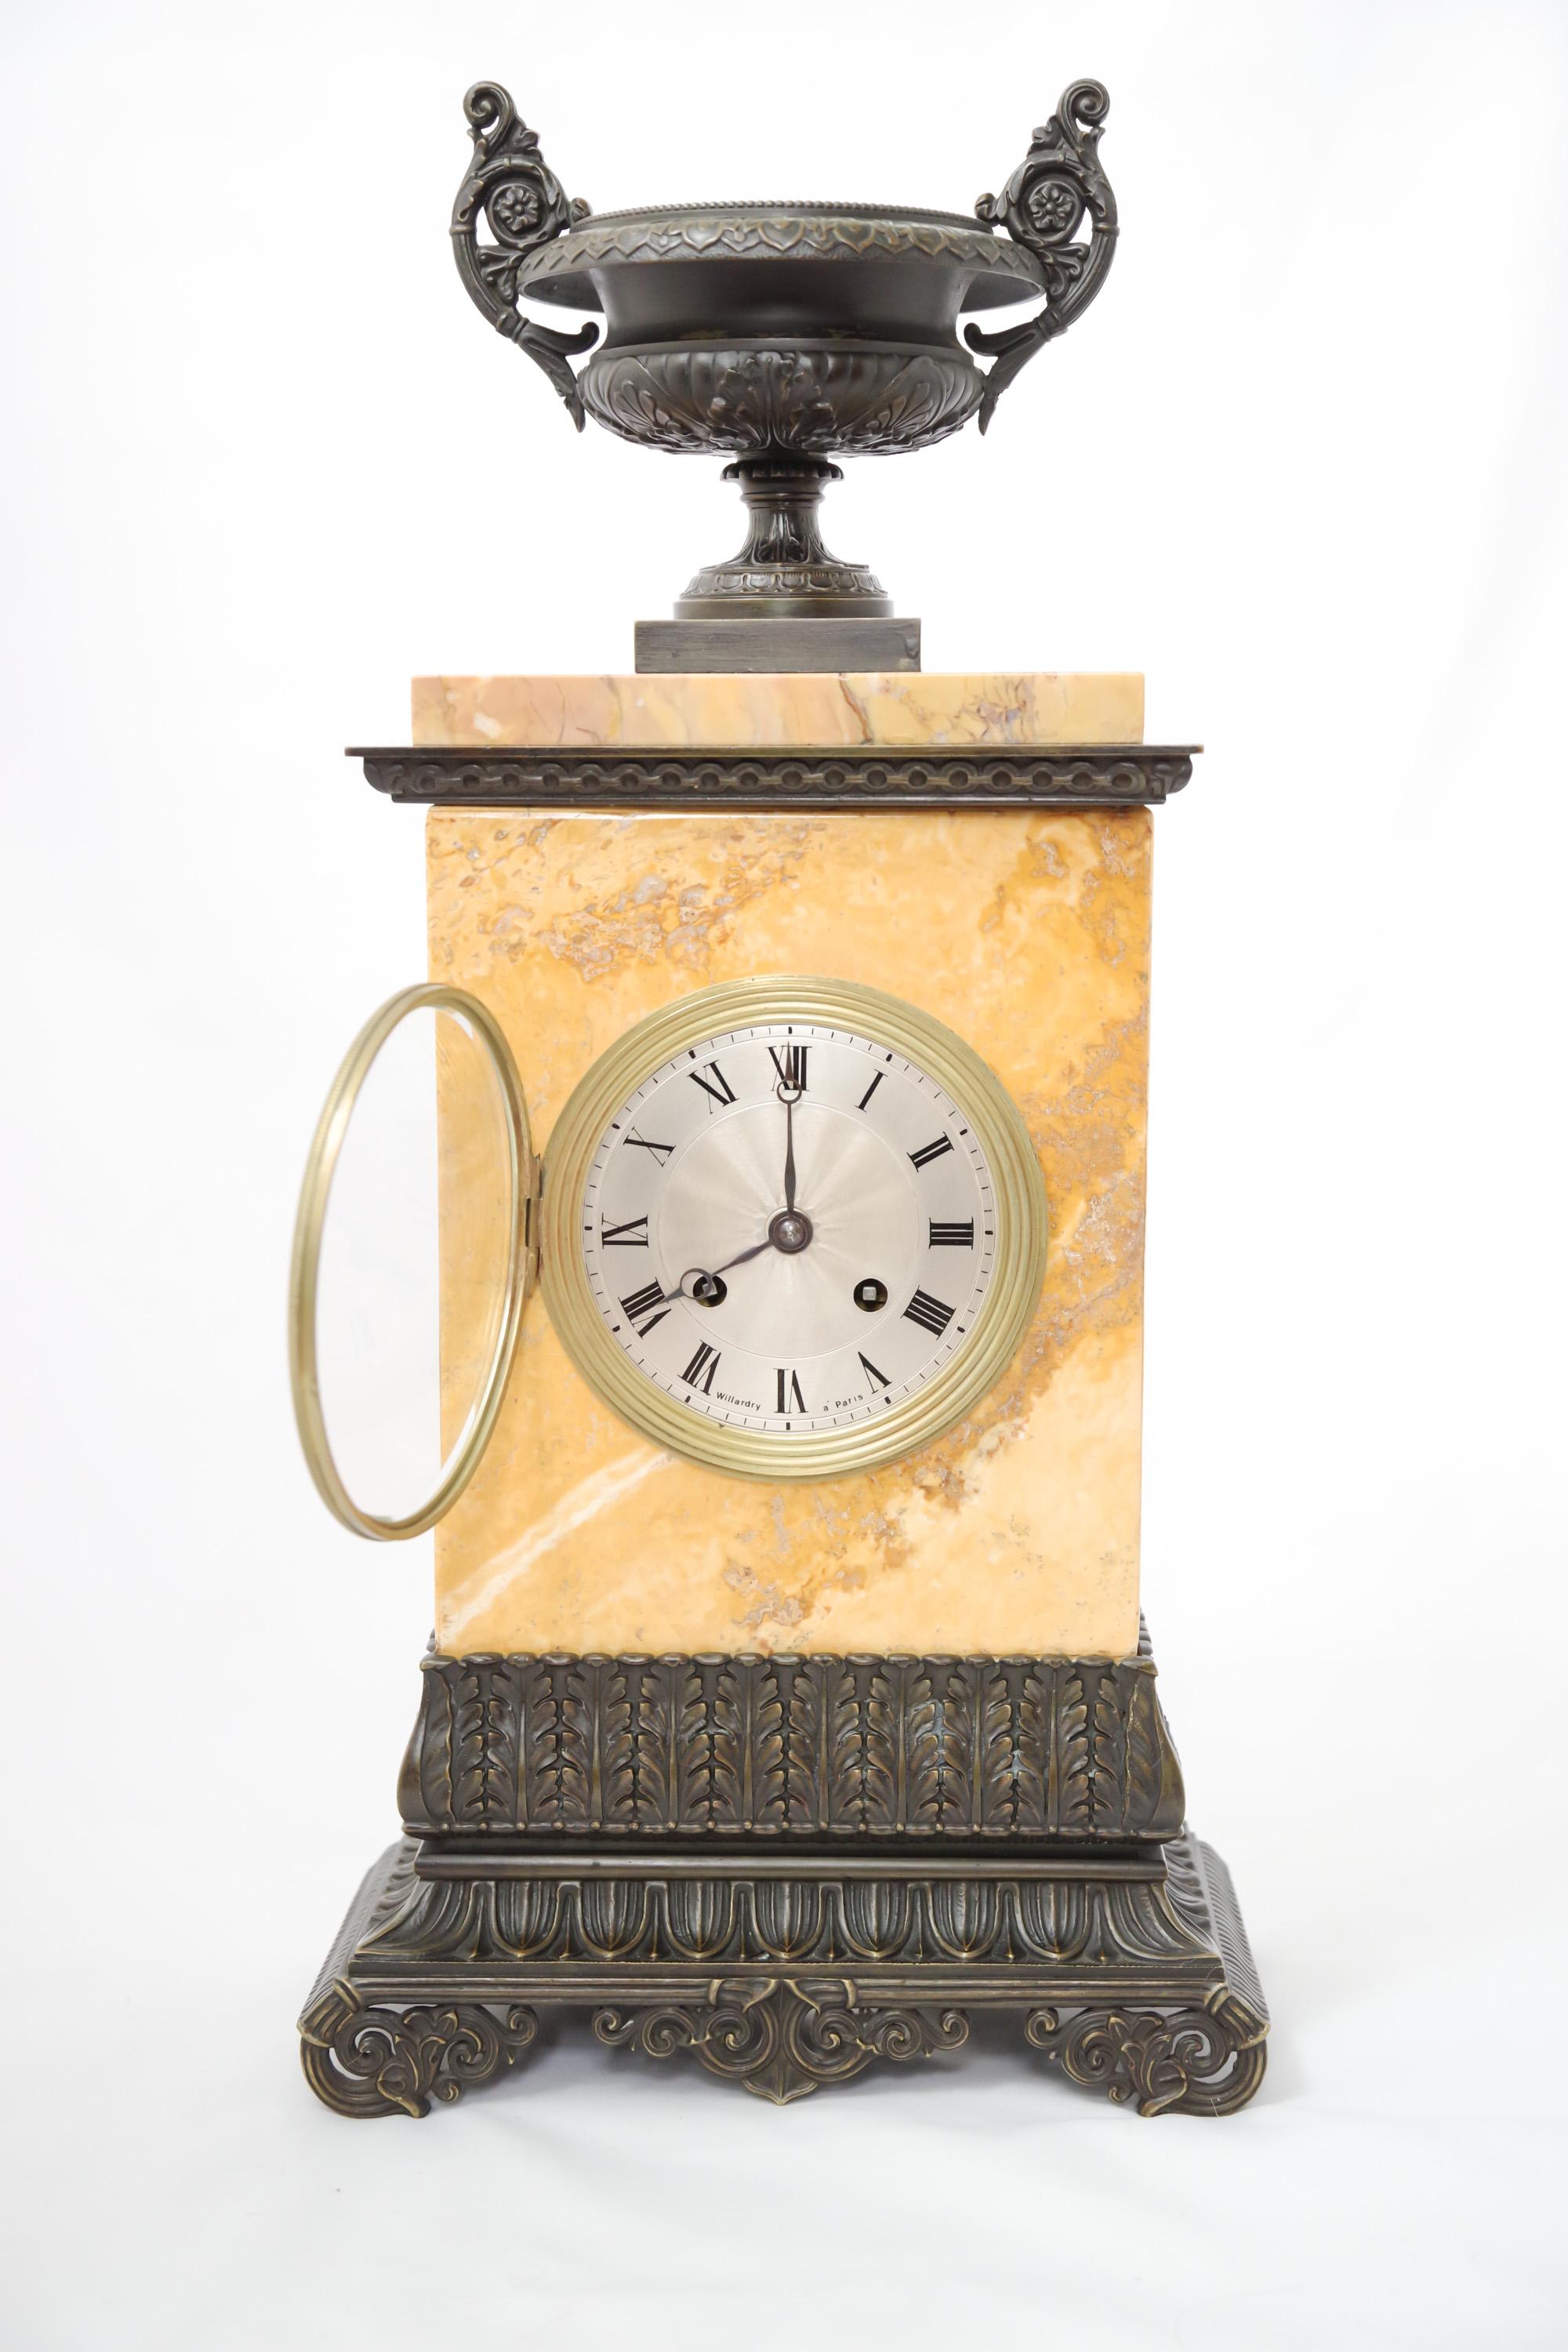 A French Sienna marble and patinated-bronze portico clock, Restauration Era, 1815-1830. The silk-thread mechanism is in good working condition with key and pendulum.